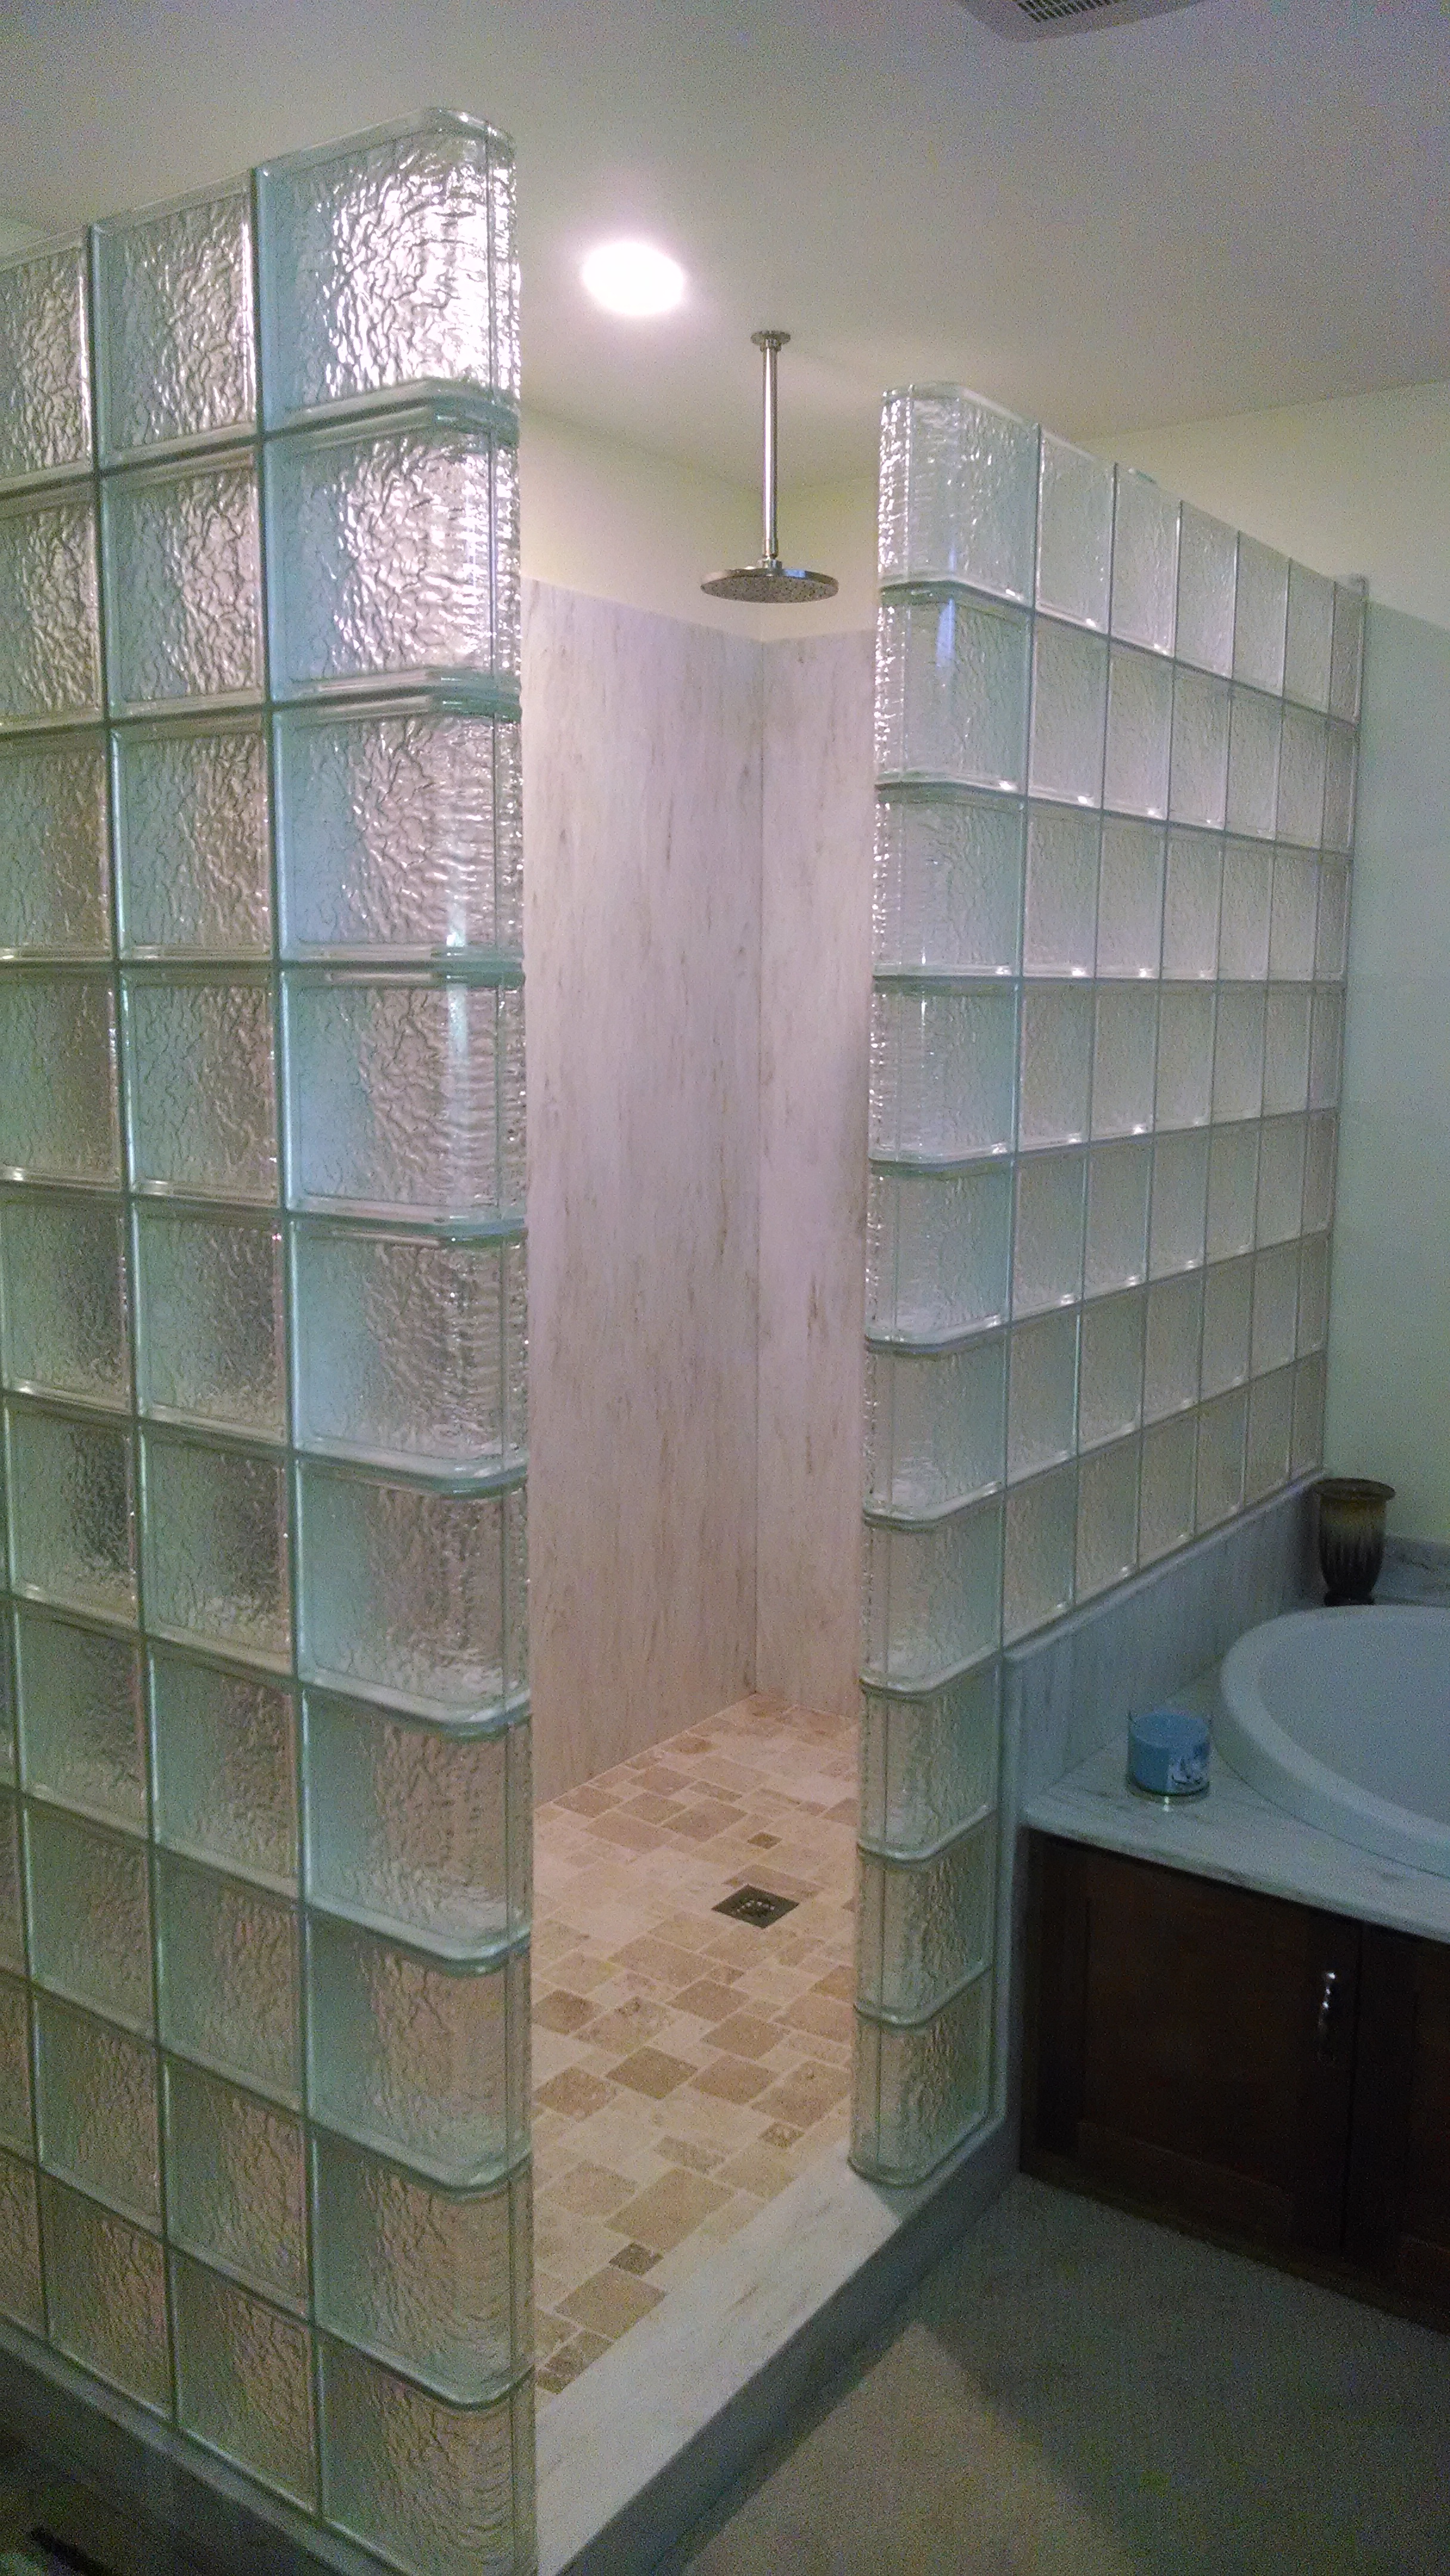 Top 3 Reasons For Upgrading To A Glass Block Shower | Glass Block ...